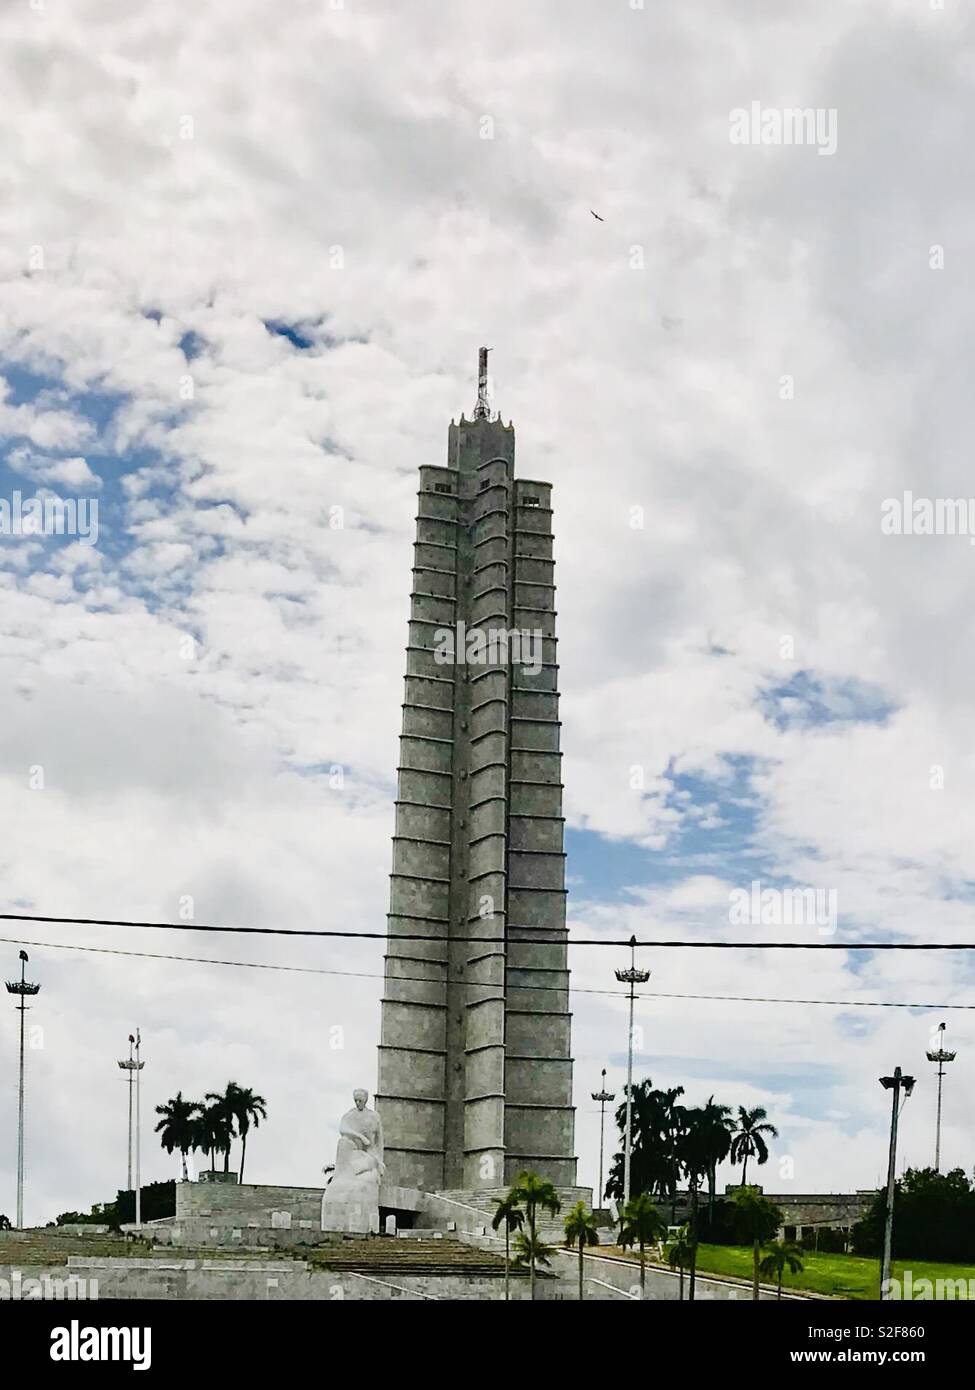 Jose Marti statue, star shaped tower, a National Hero in Cuba, the largest monument to a writer in the world, Plaza de Revolucion, Vedado, Havana Cuba Stock Photo